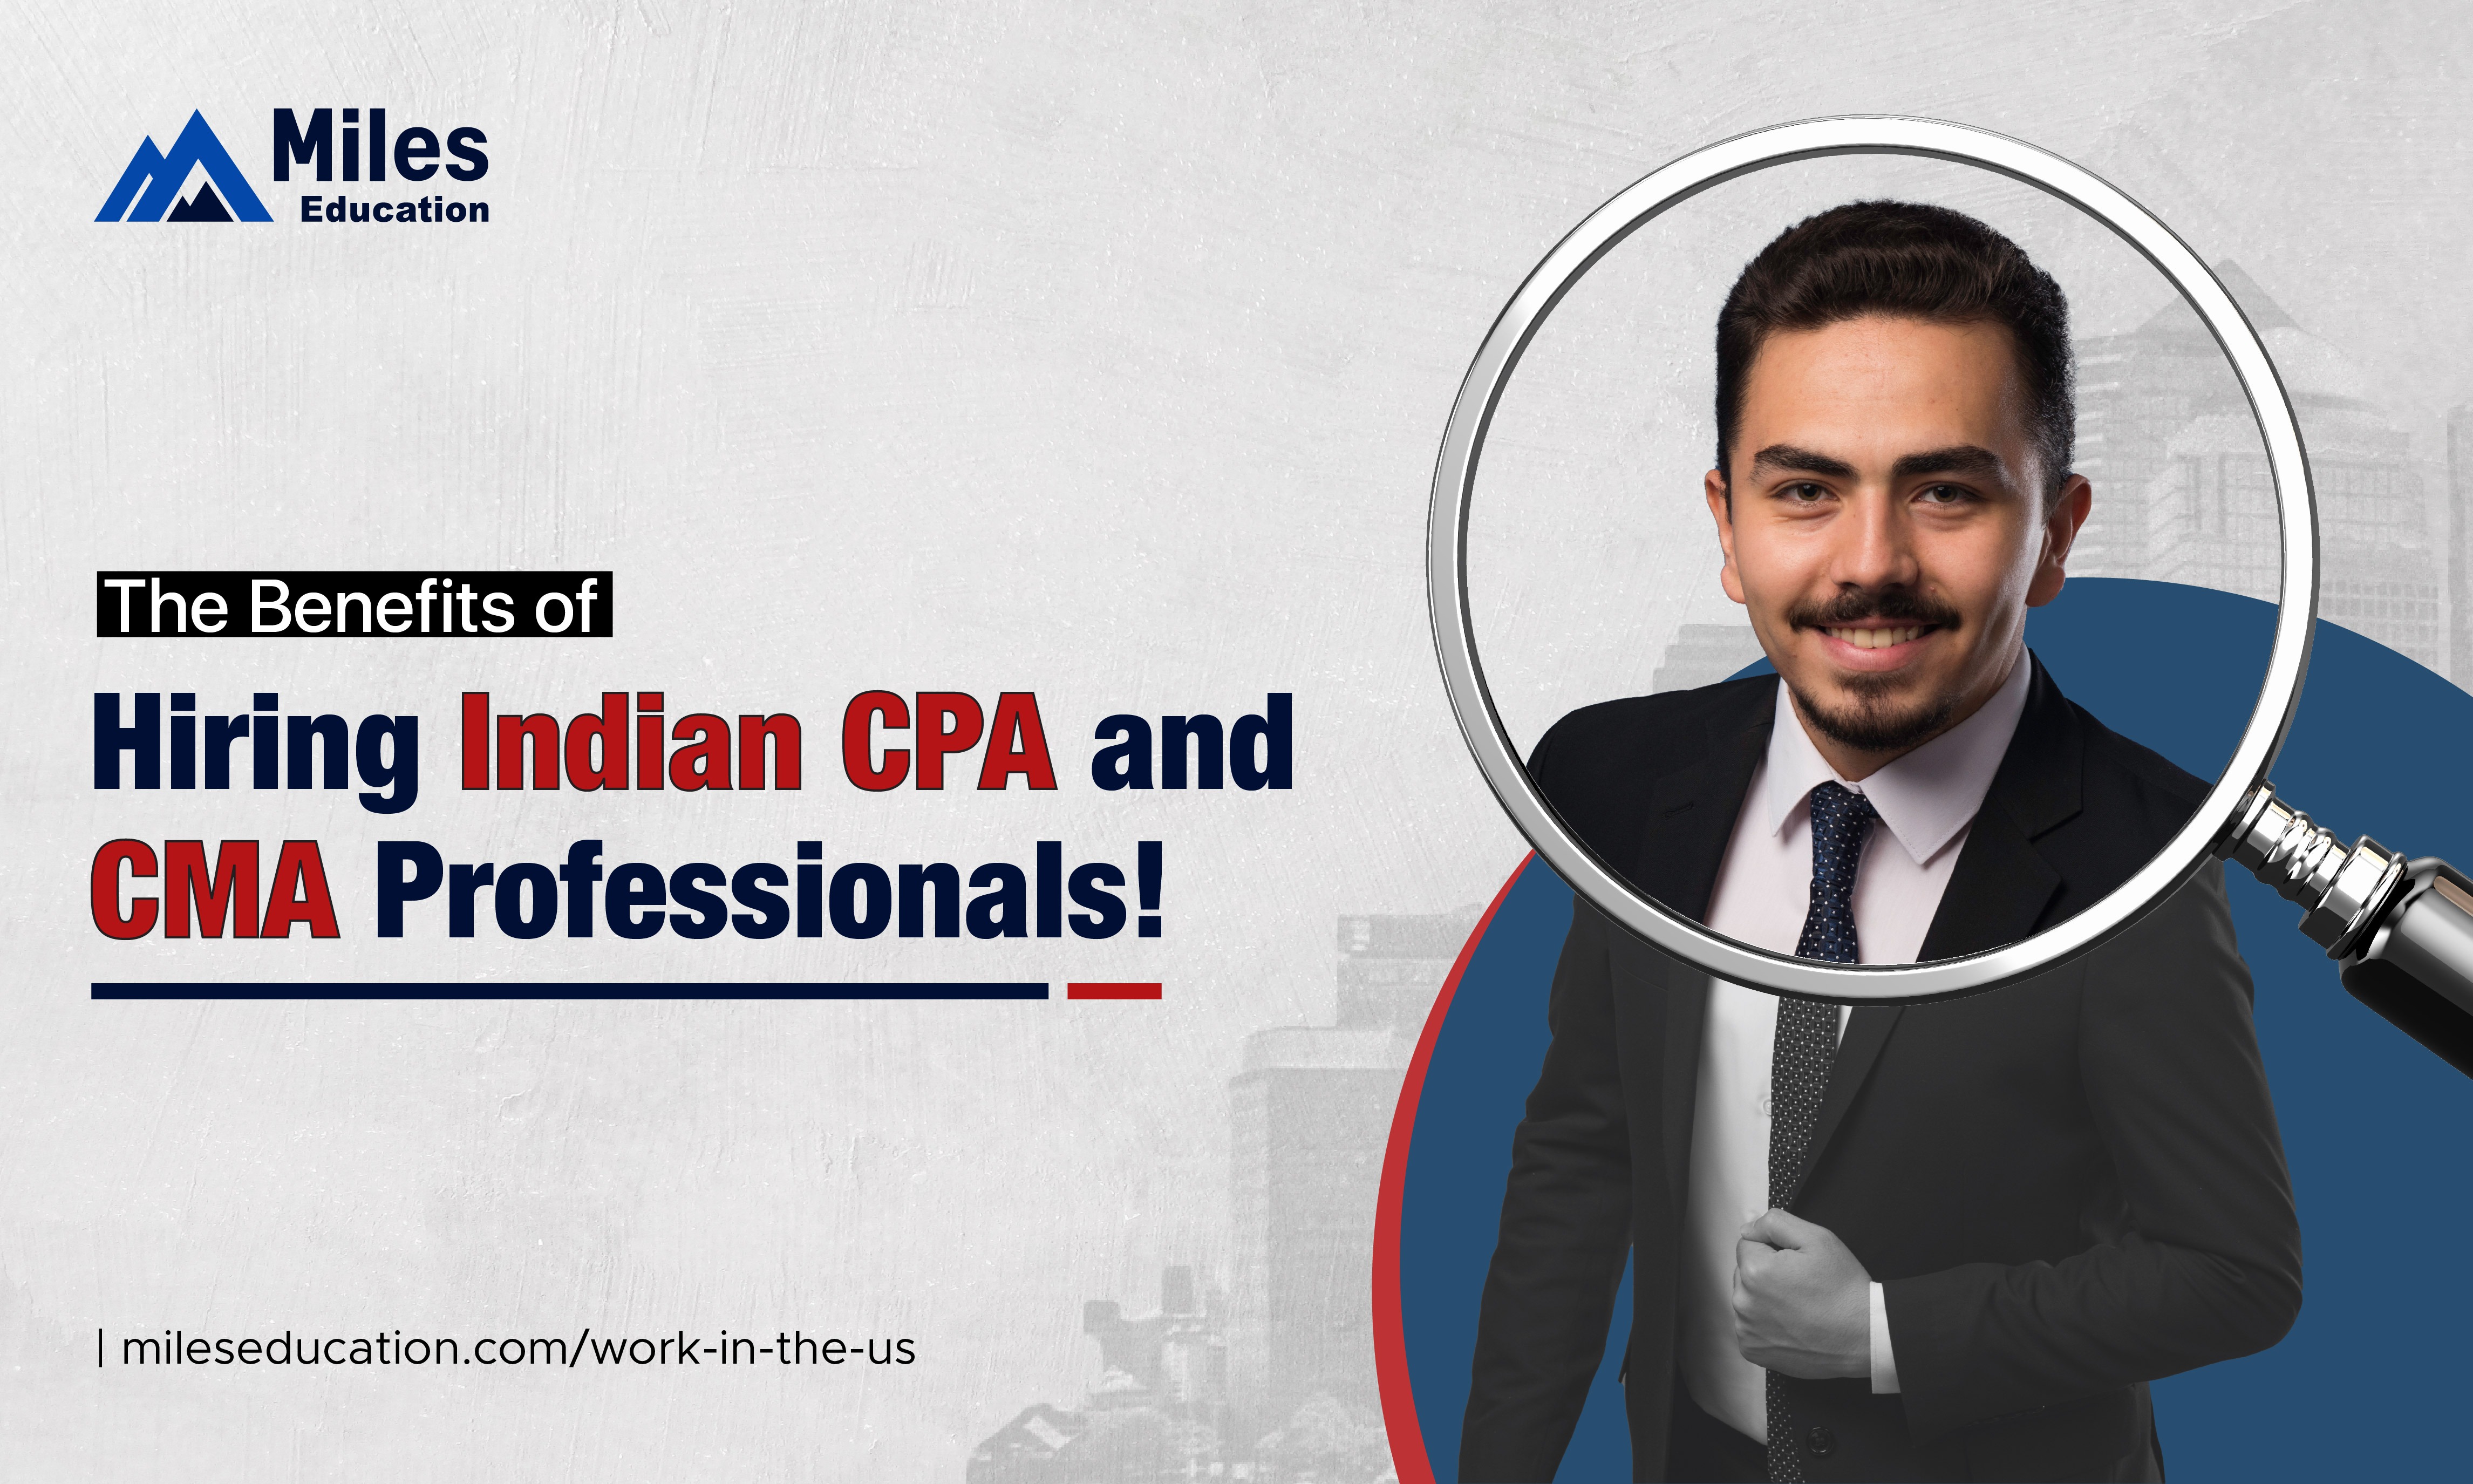 The Benefits of Hiring Indian CPA and CMA Professionals!